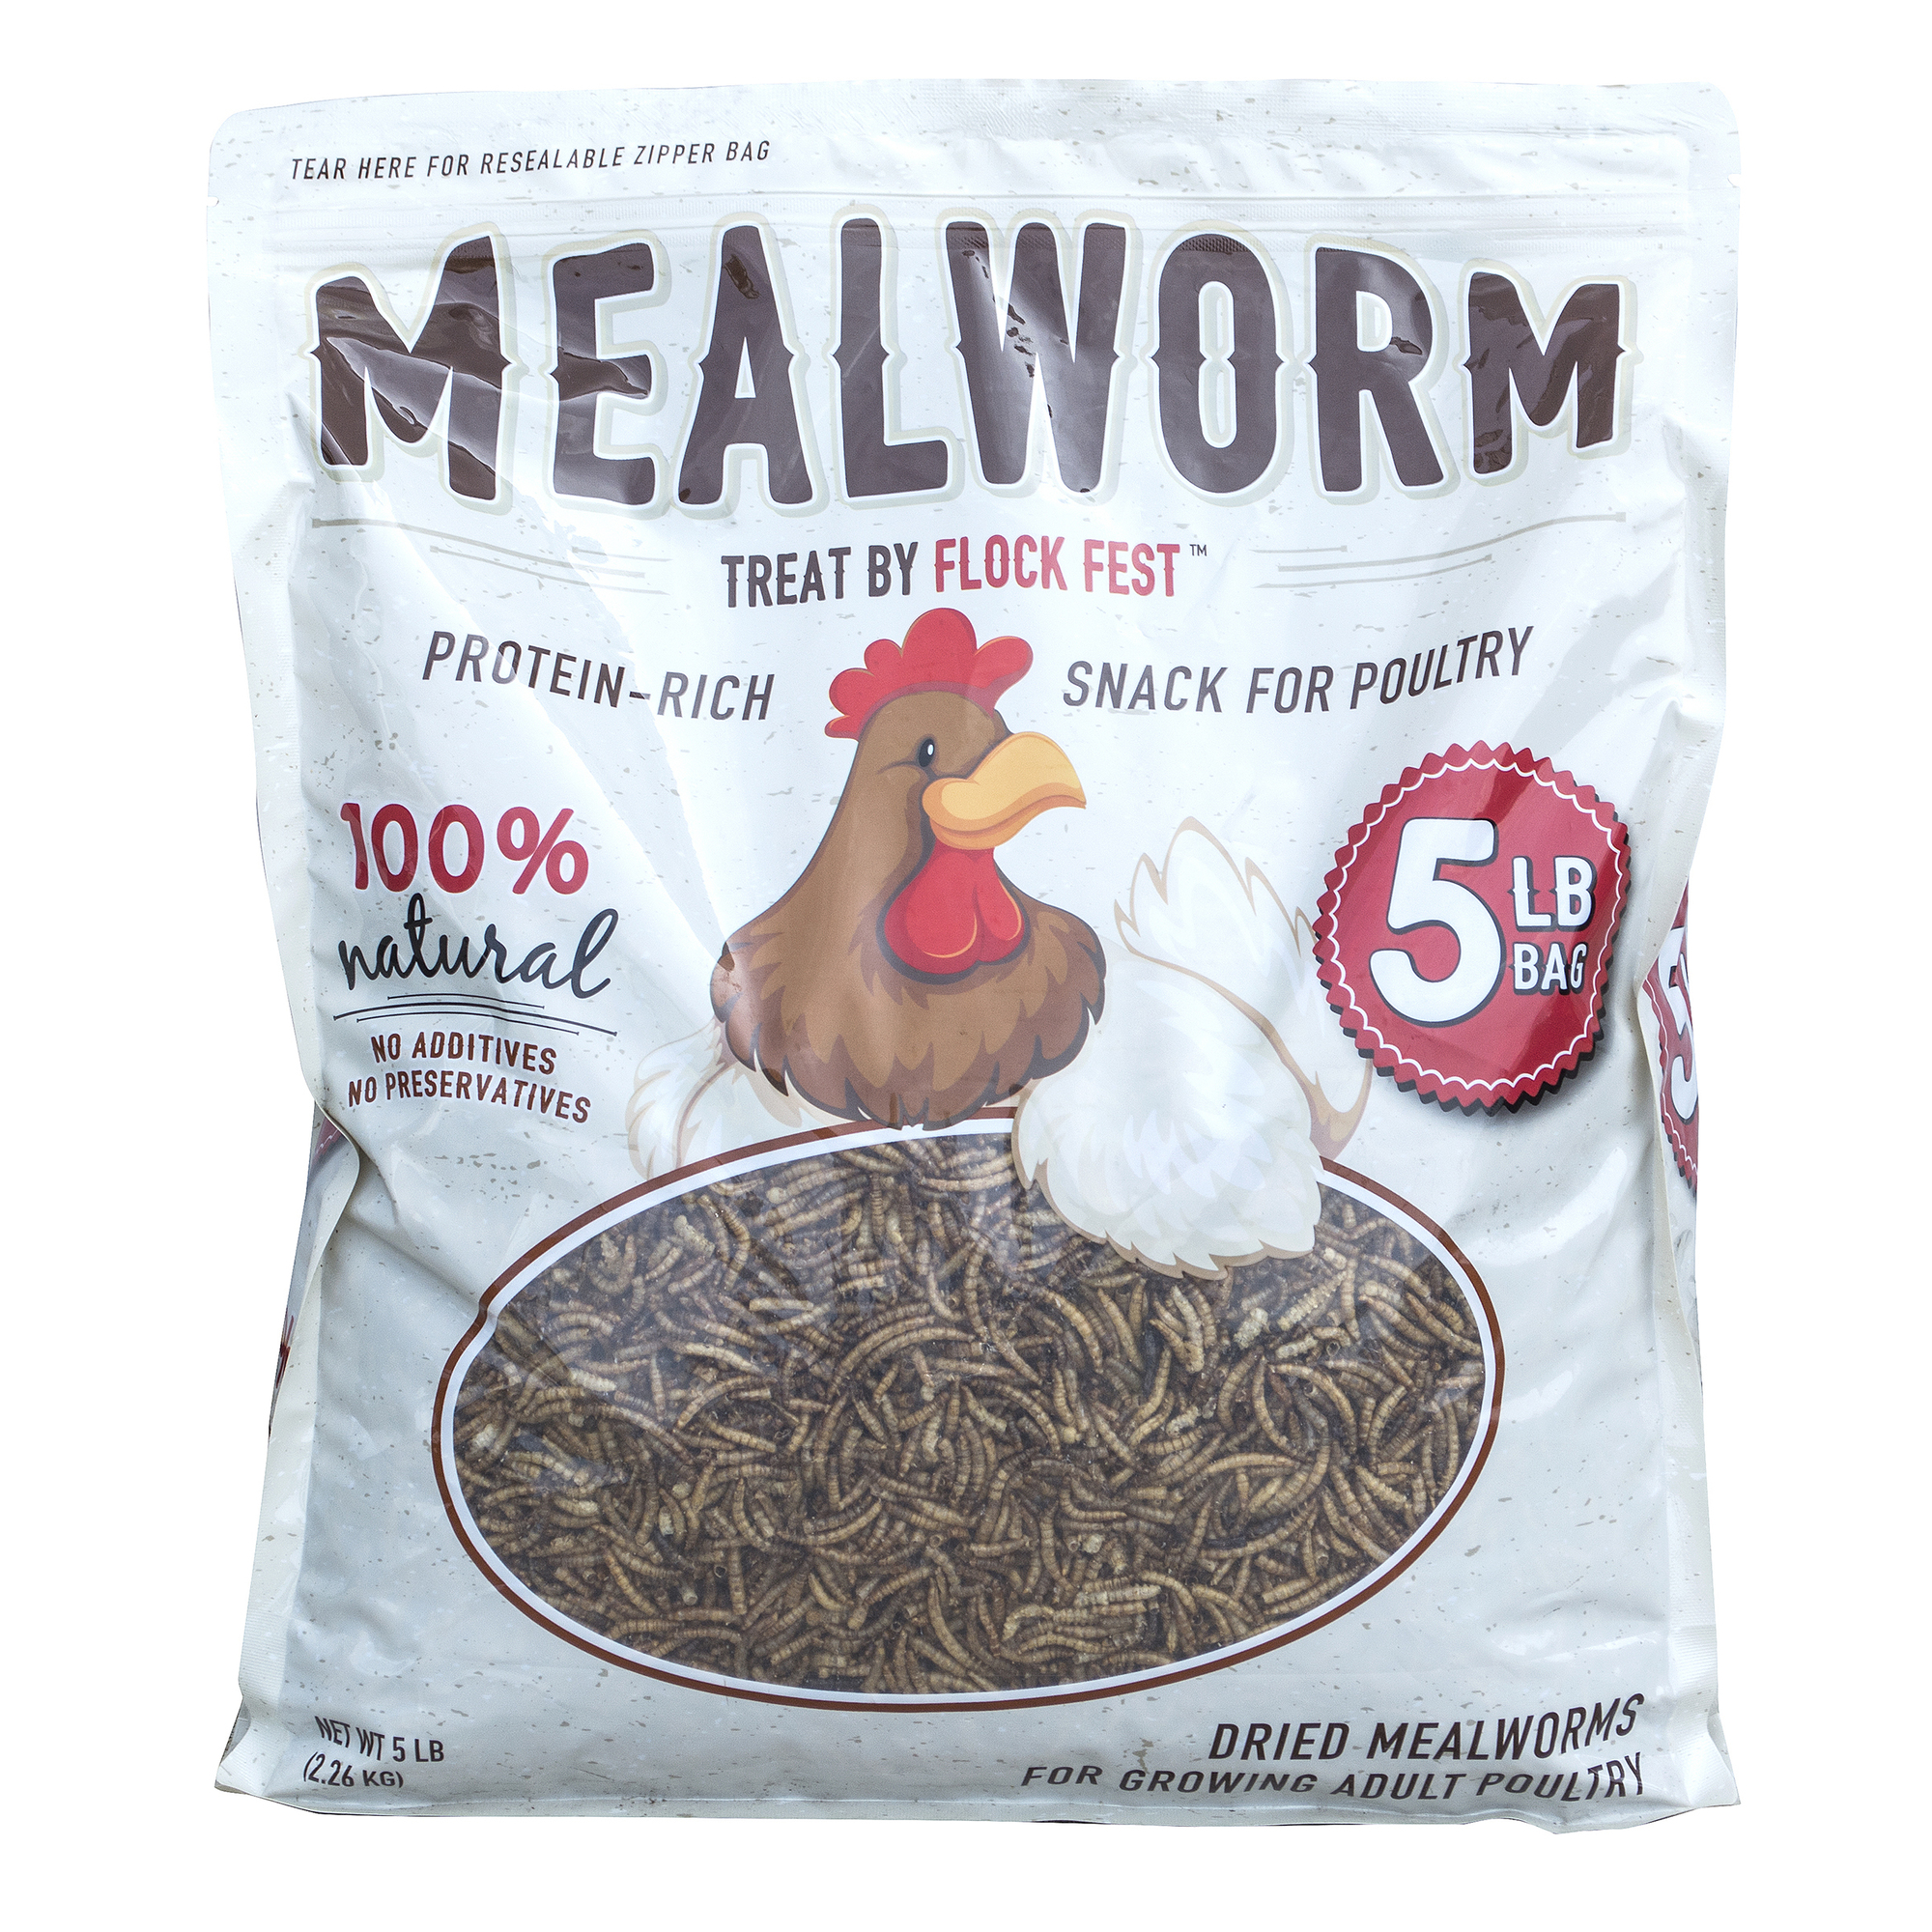 Buffalo Tools, Dried Mealworms 5 Lbs Bag for Chickens, Birds, Etc, Model DMW5